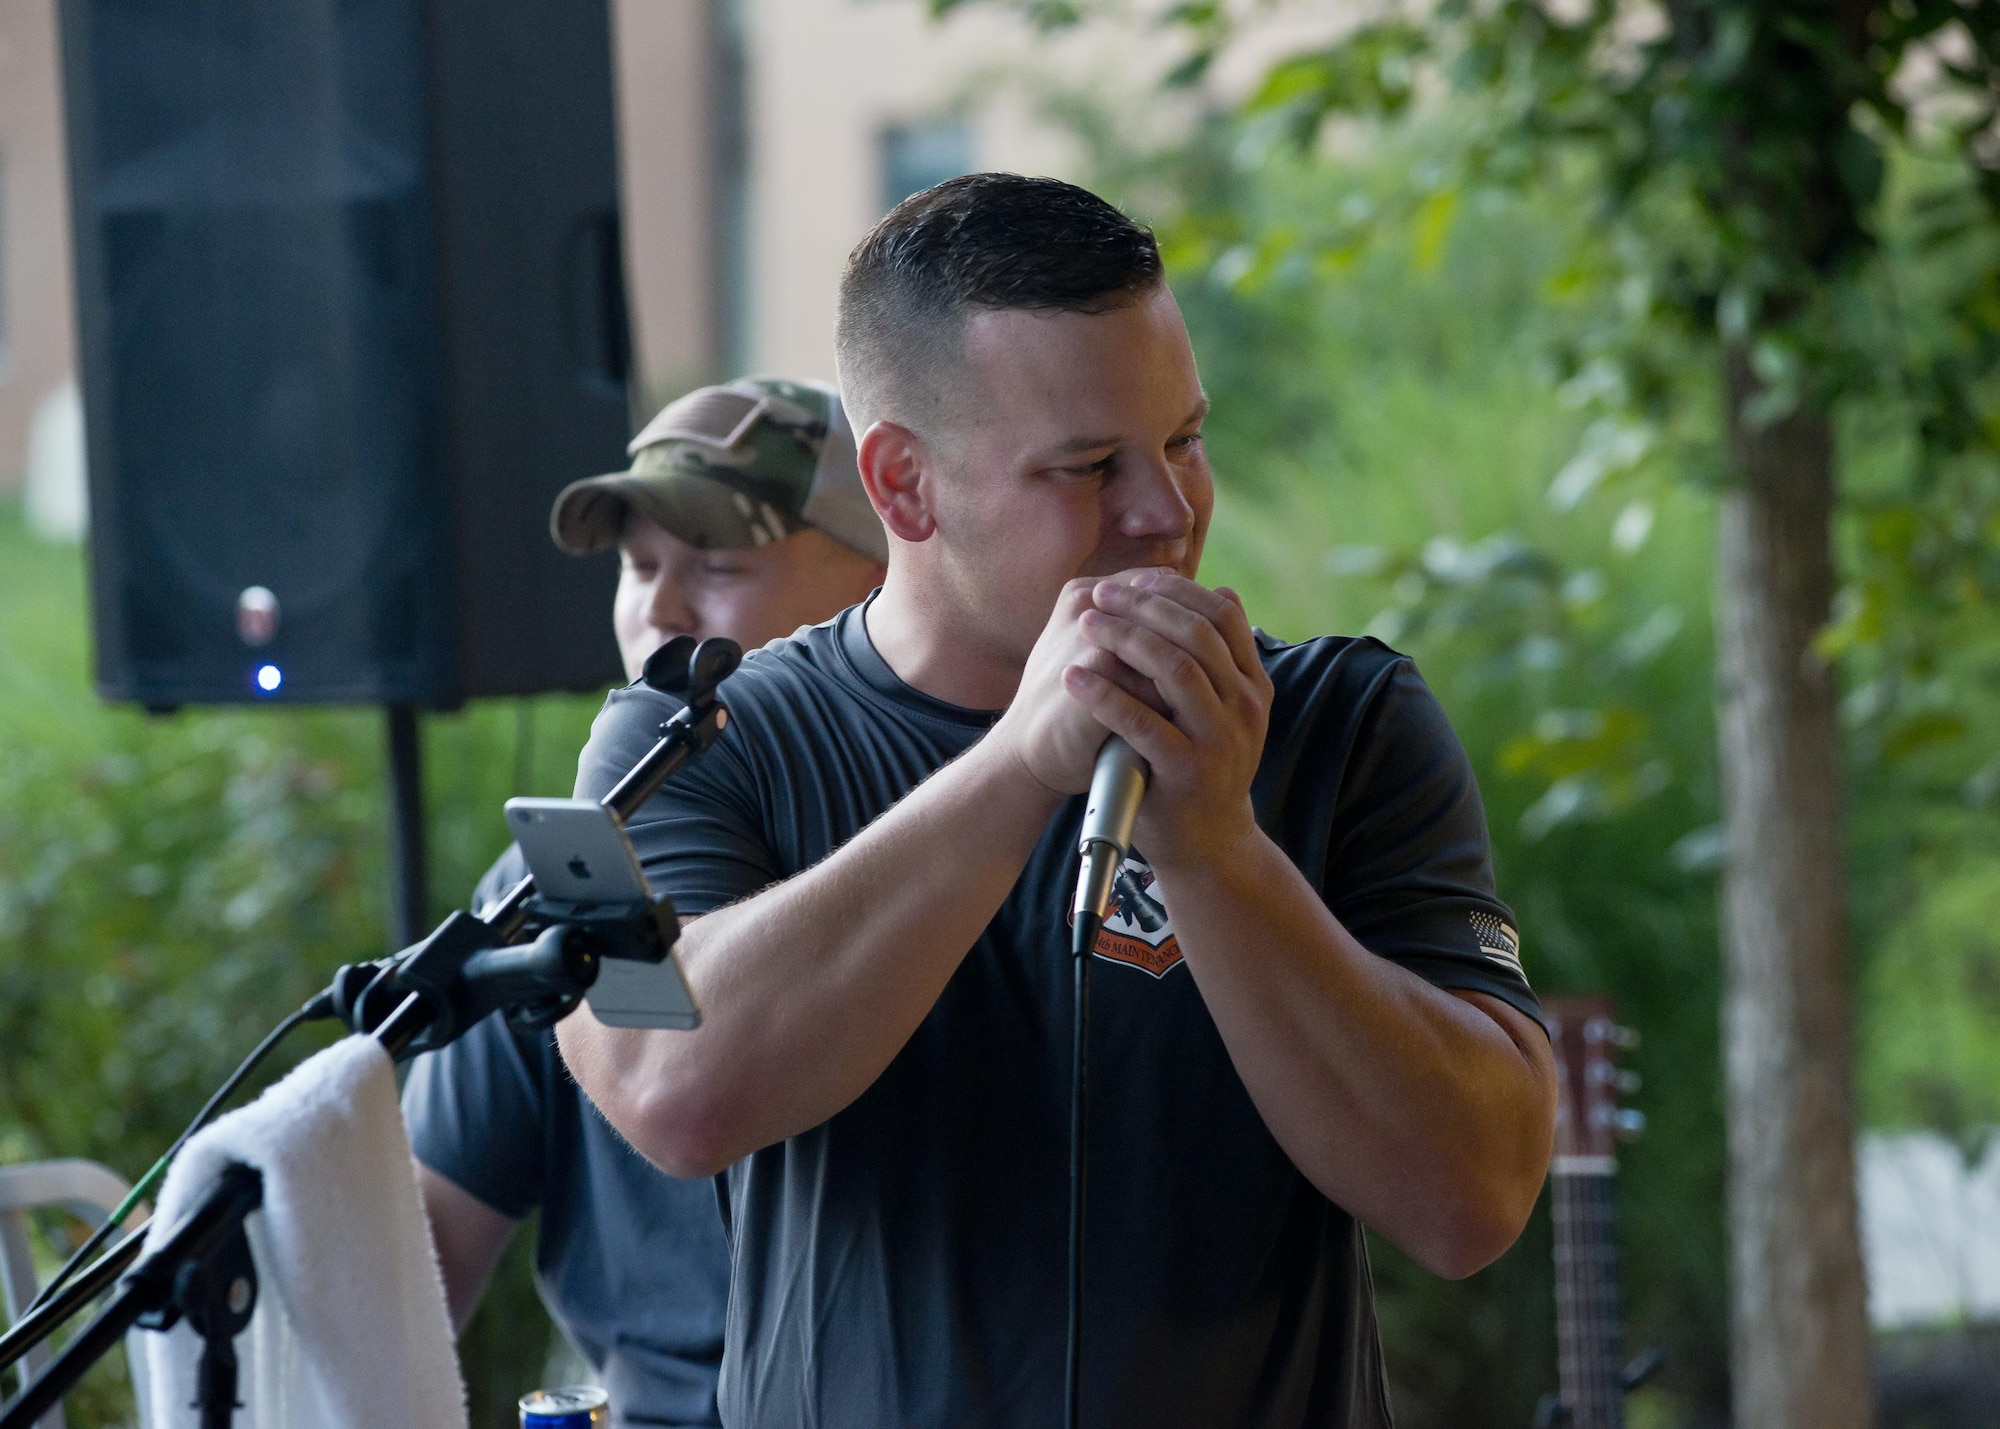 Airmen from the Air National Guard Band of the South perform August 15, 2017, at the ANG's 2017 Enlisted Leadership Symposium in Camp Dawson, West Virginia. The three-day event was designed to provide enlisted Airmen of all levels with a broad range of leadership tools to apply in their units. (U.S. Air National Guard photo/Staff Sgt. John E. Hillier)